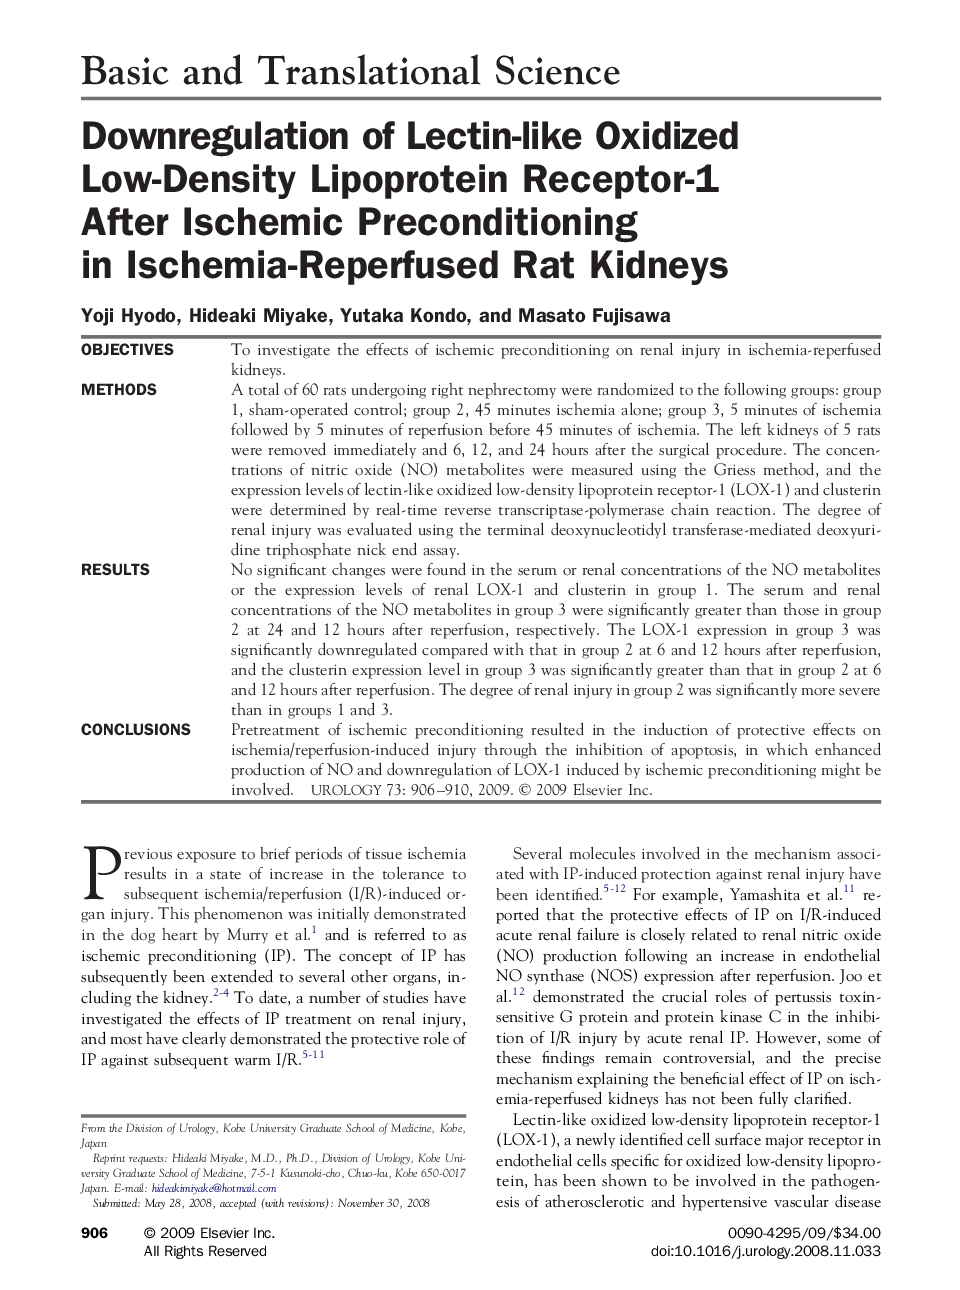 Downregulation of Lectin-like Oxidized Low-Density Lipoprotein Receptor-1 After Ischemic Preconditioning in Ischemia-Reperfused Rat Kidneys